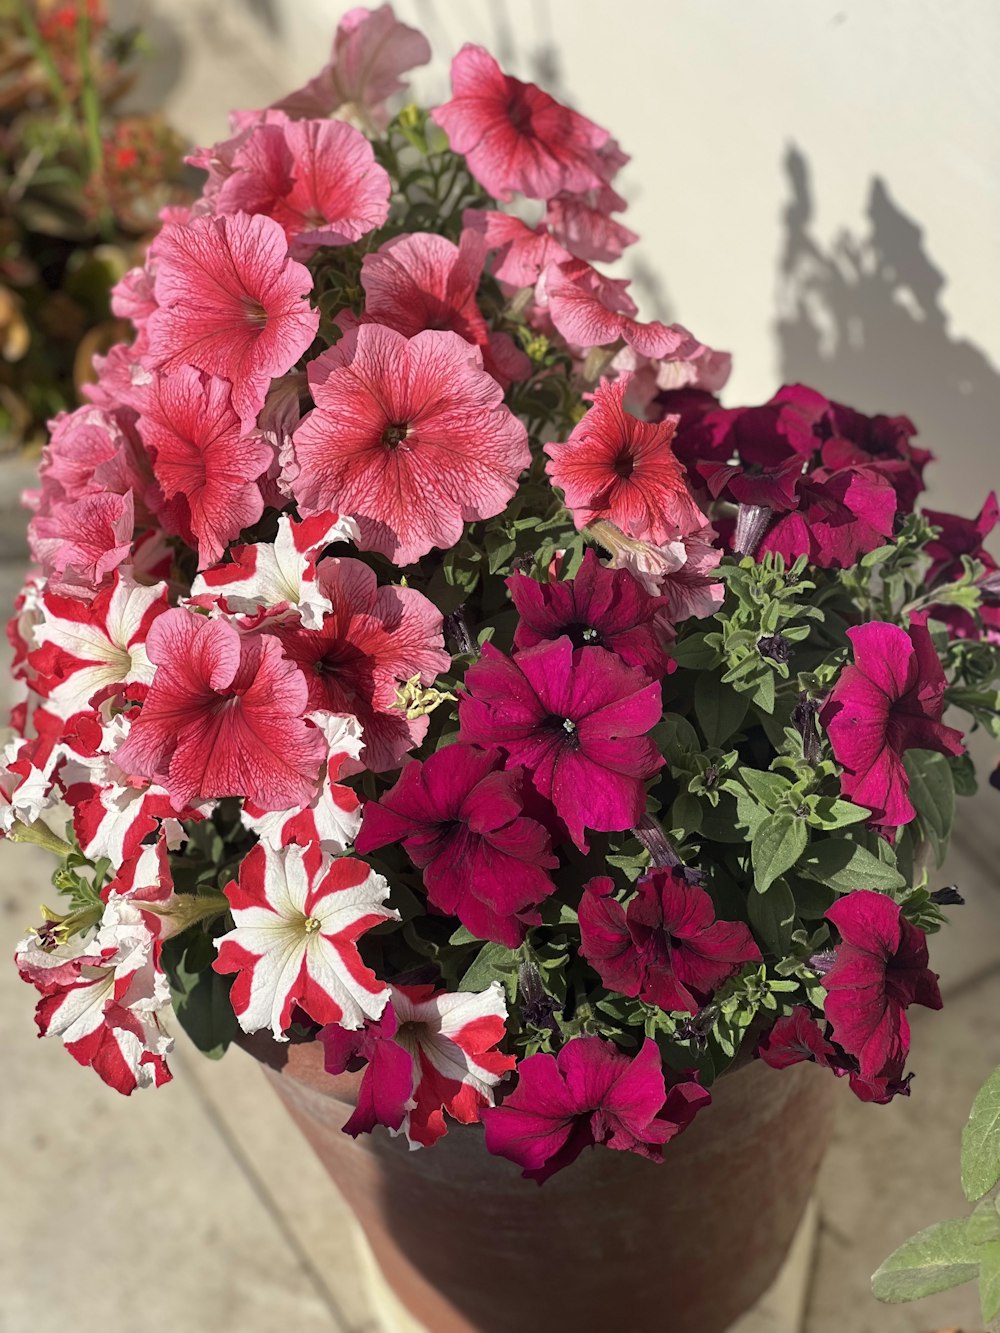 a potted plant with pink and white flowers